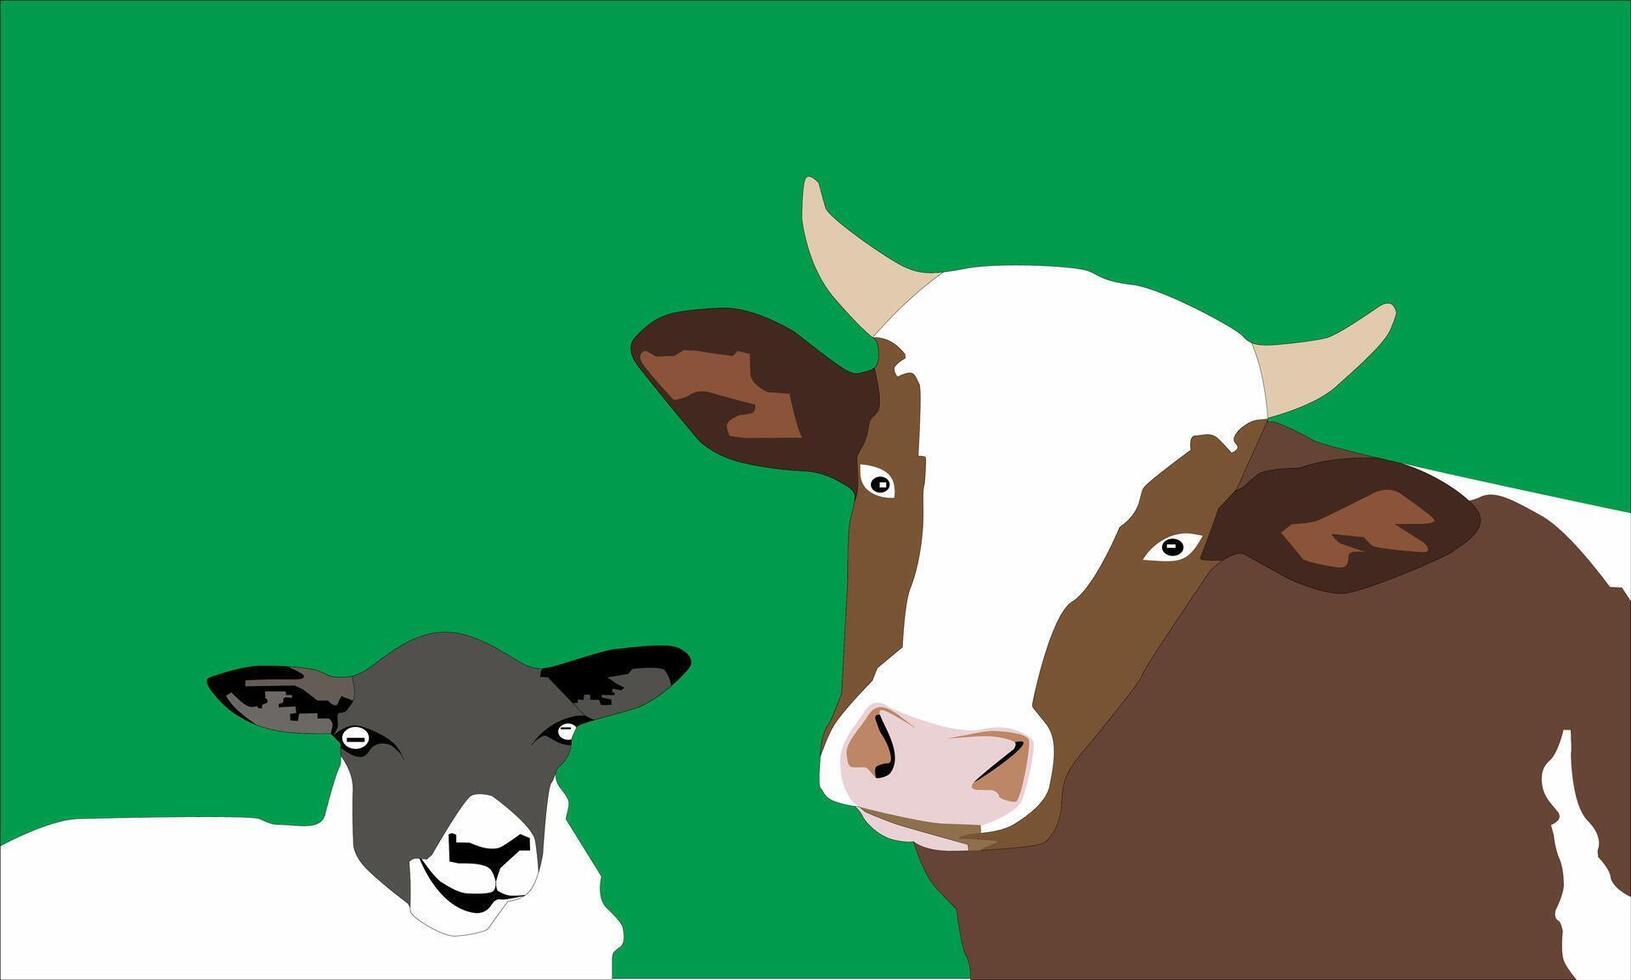 illustration of a brown cow and a white sheep with half a body vector